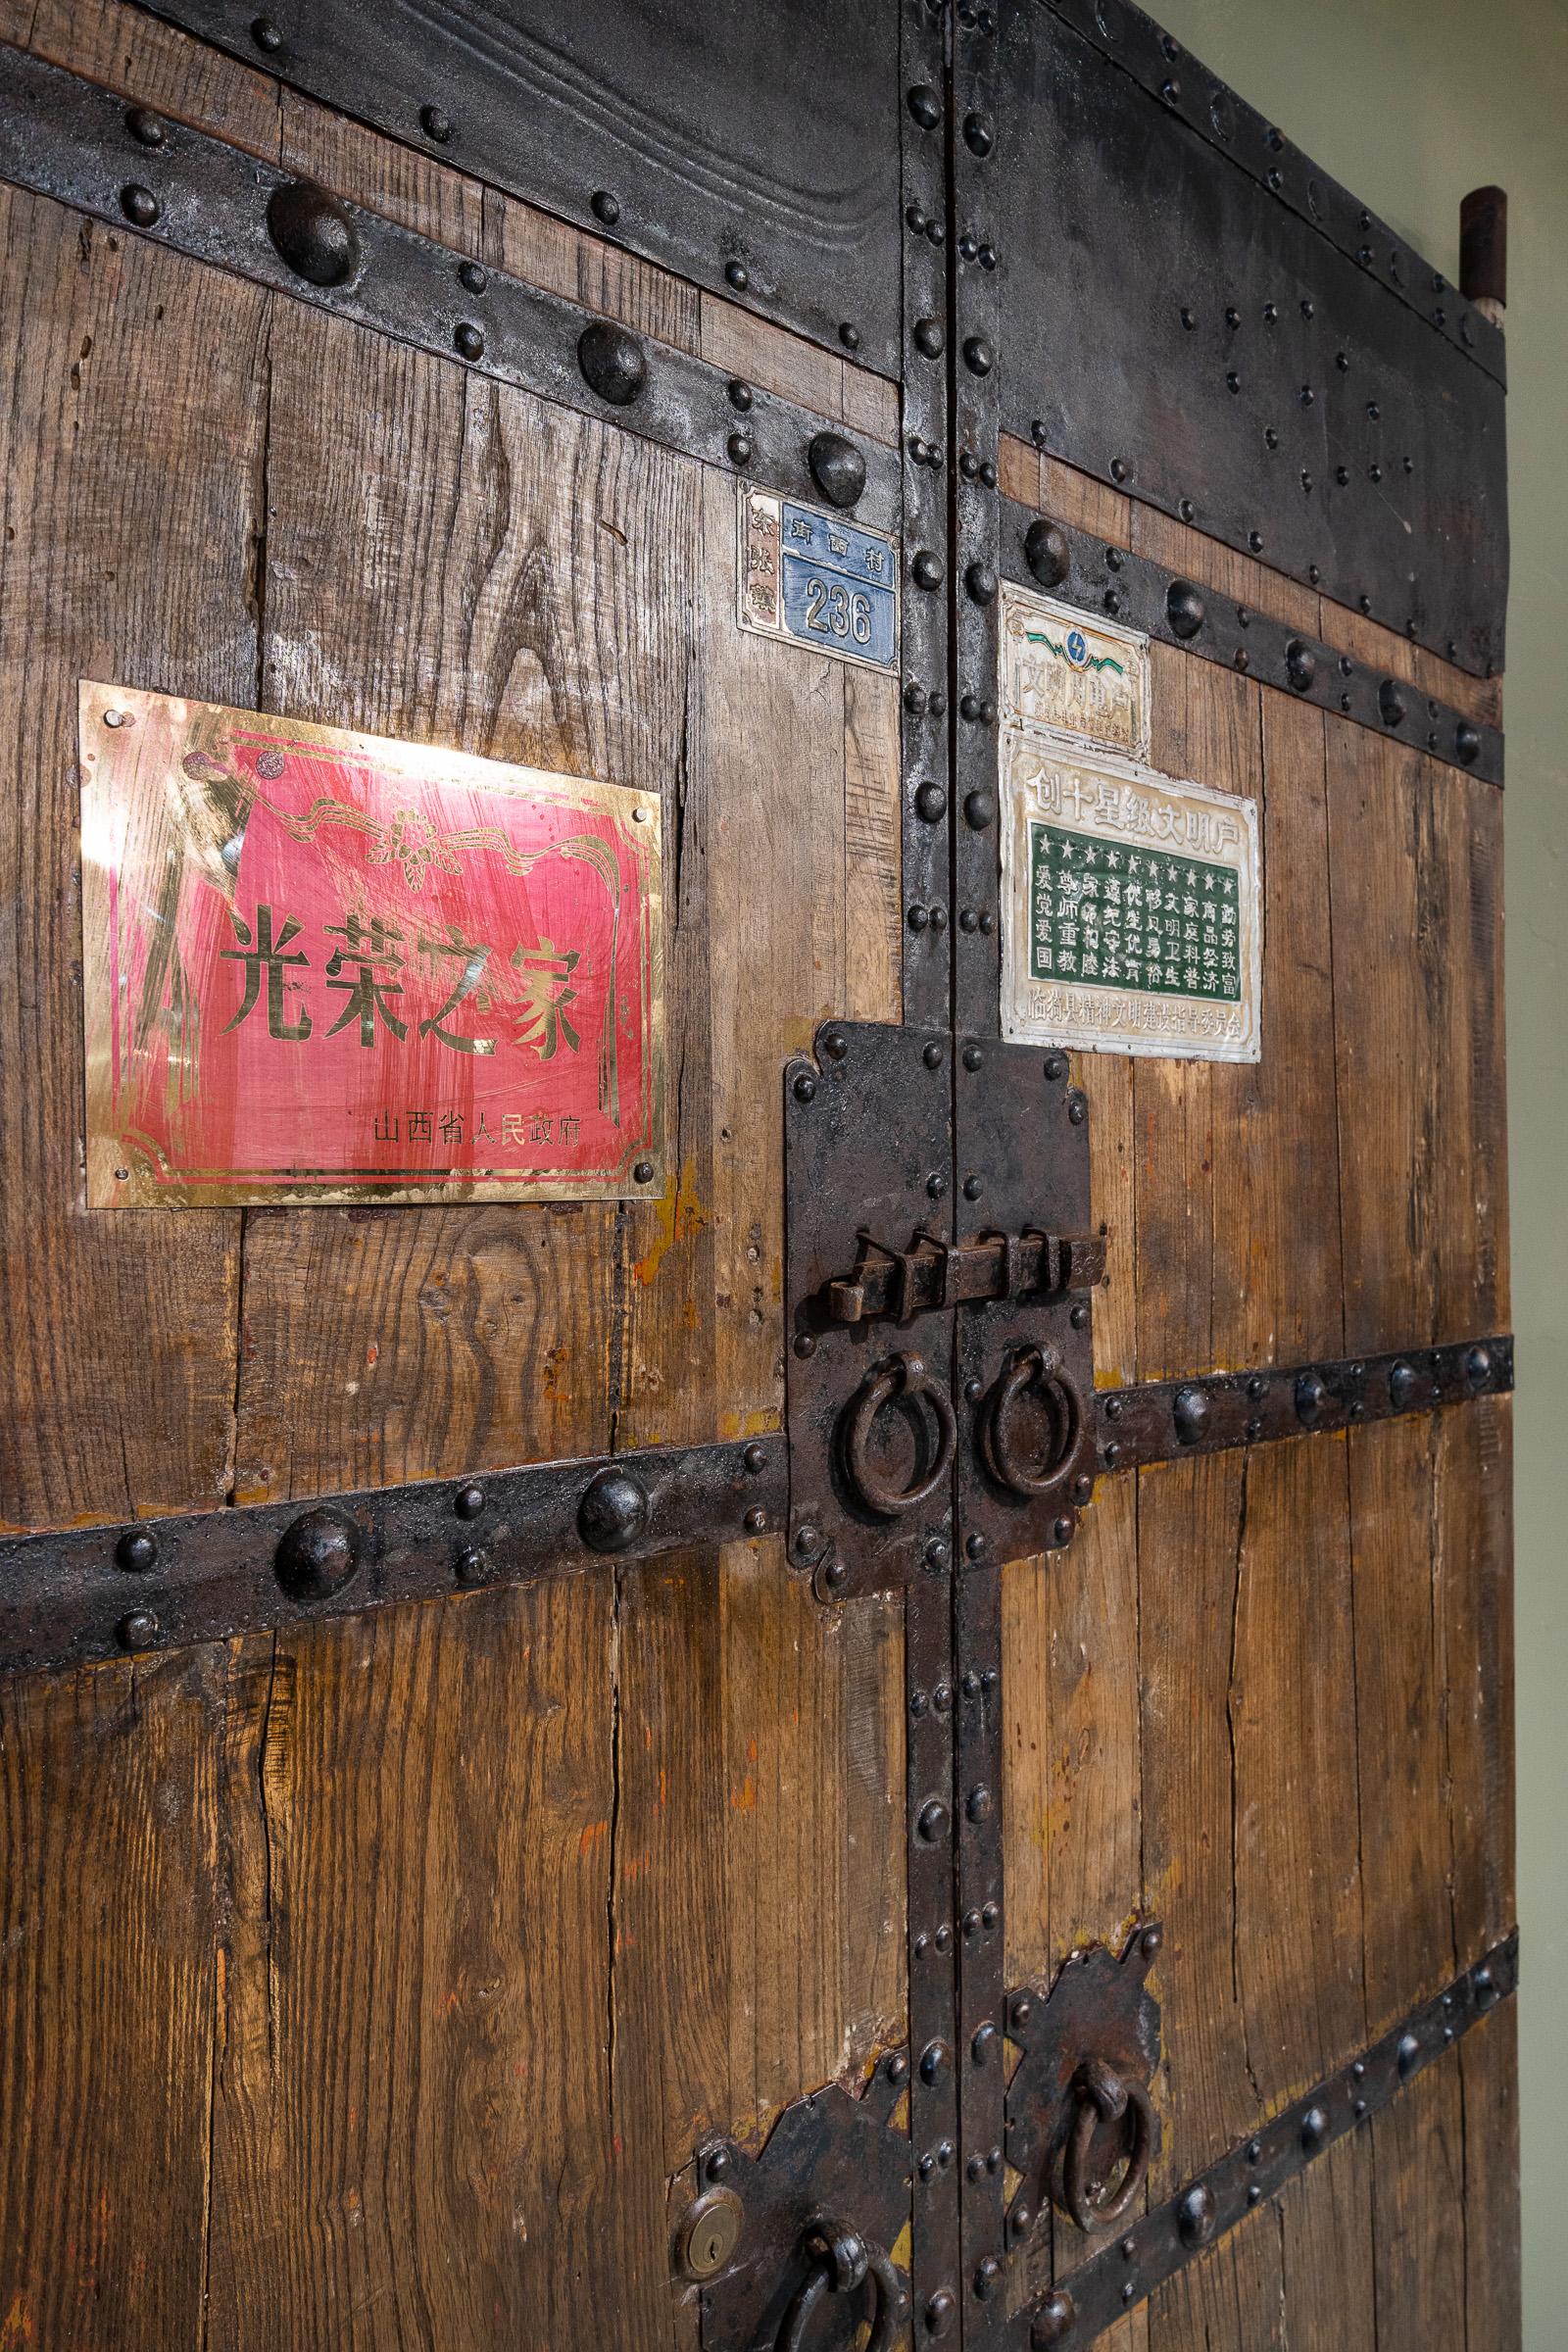 These large doors originated from Shanxi province, China, and are approx. 100-120 years old. Made of Elm & Pine, the most unique part about these doors are the many signs that are affixed on it, do note that although the doors are antique, these